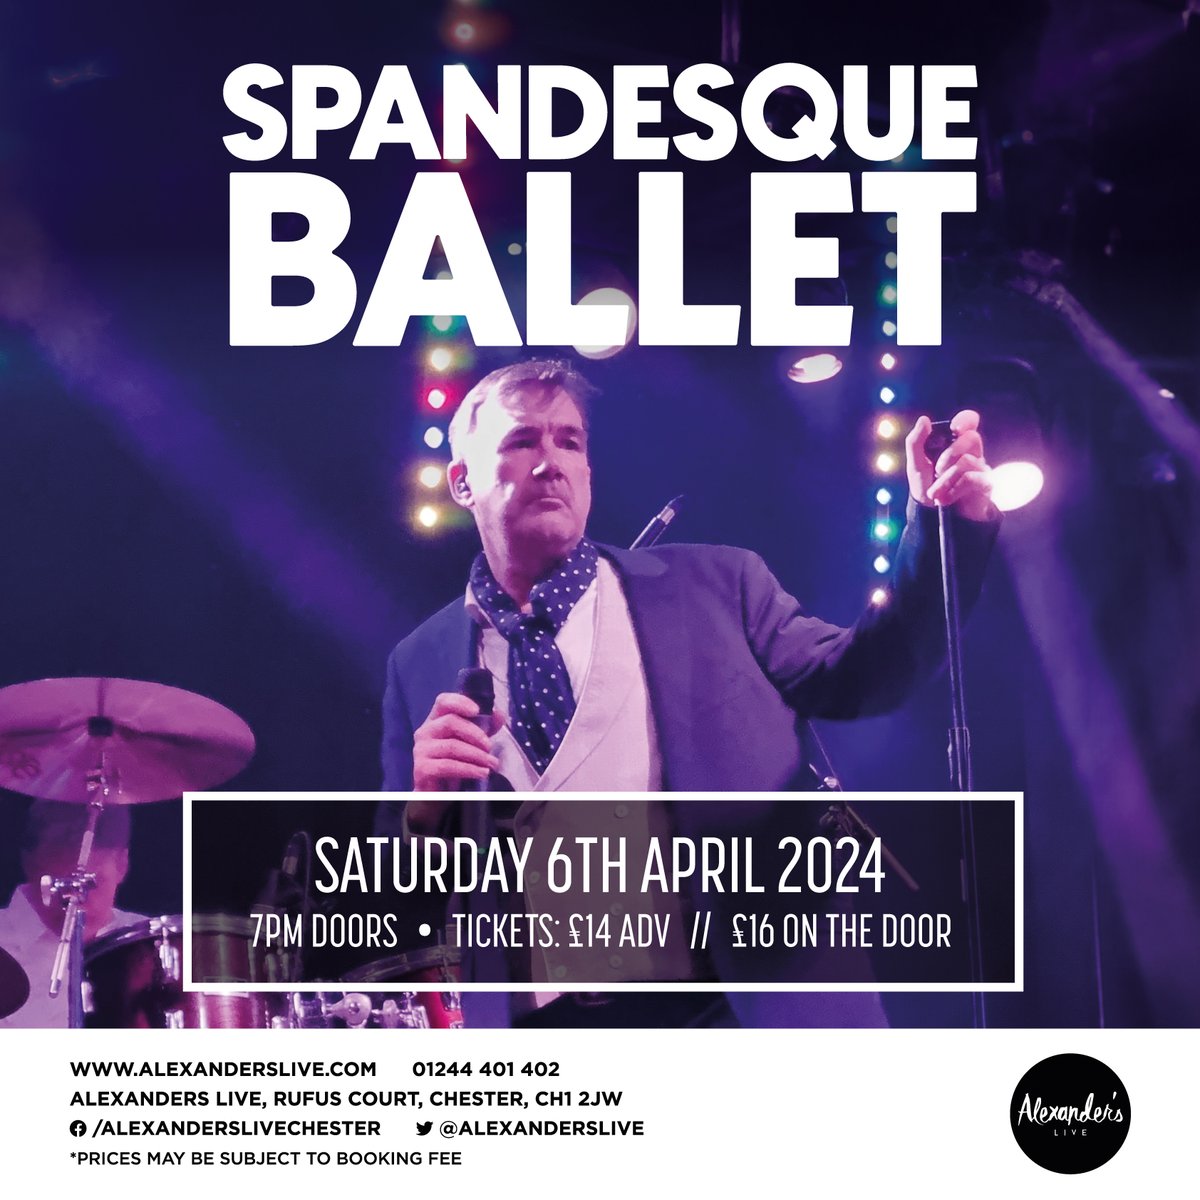 Spandesque Ballet 💃🕺are coming to Alexander's Live Chester next Saturday 6th April and we still have a handful of tickets available! Buy yours now - alexanderslive.seetickets.com/event/spandesq… @Dee1063 @ShitChester @SkintChester @welovegoodtimes @chesterdotcom @chestertweetsuk #spandauballet